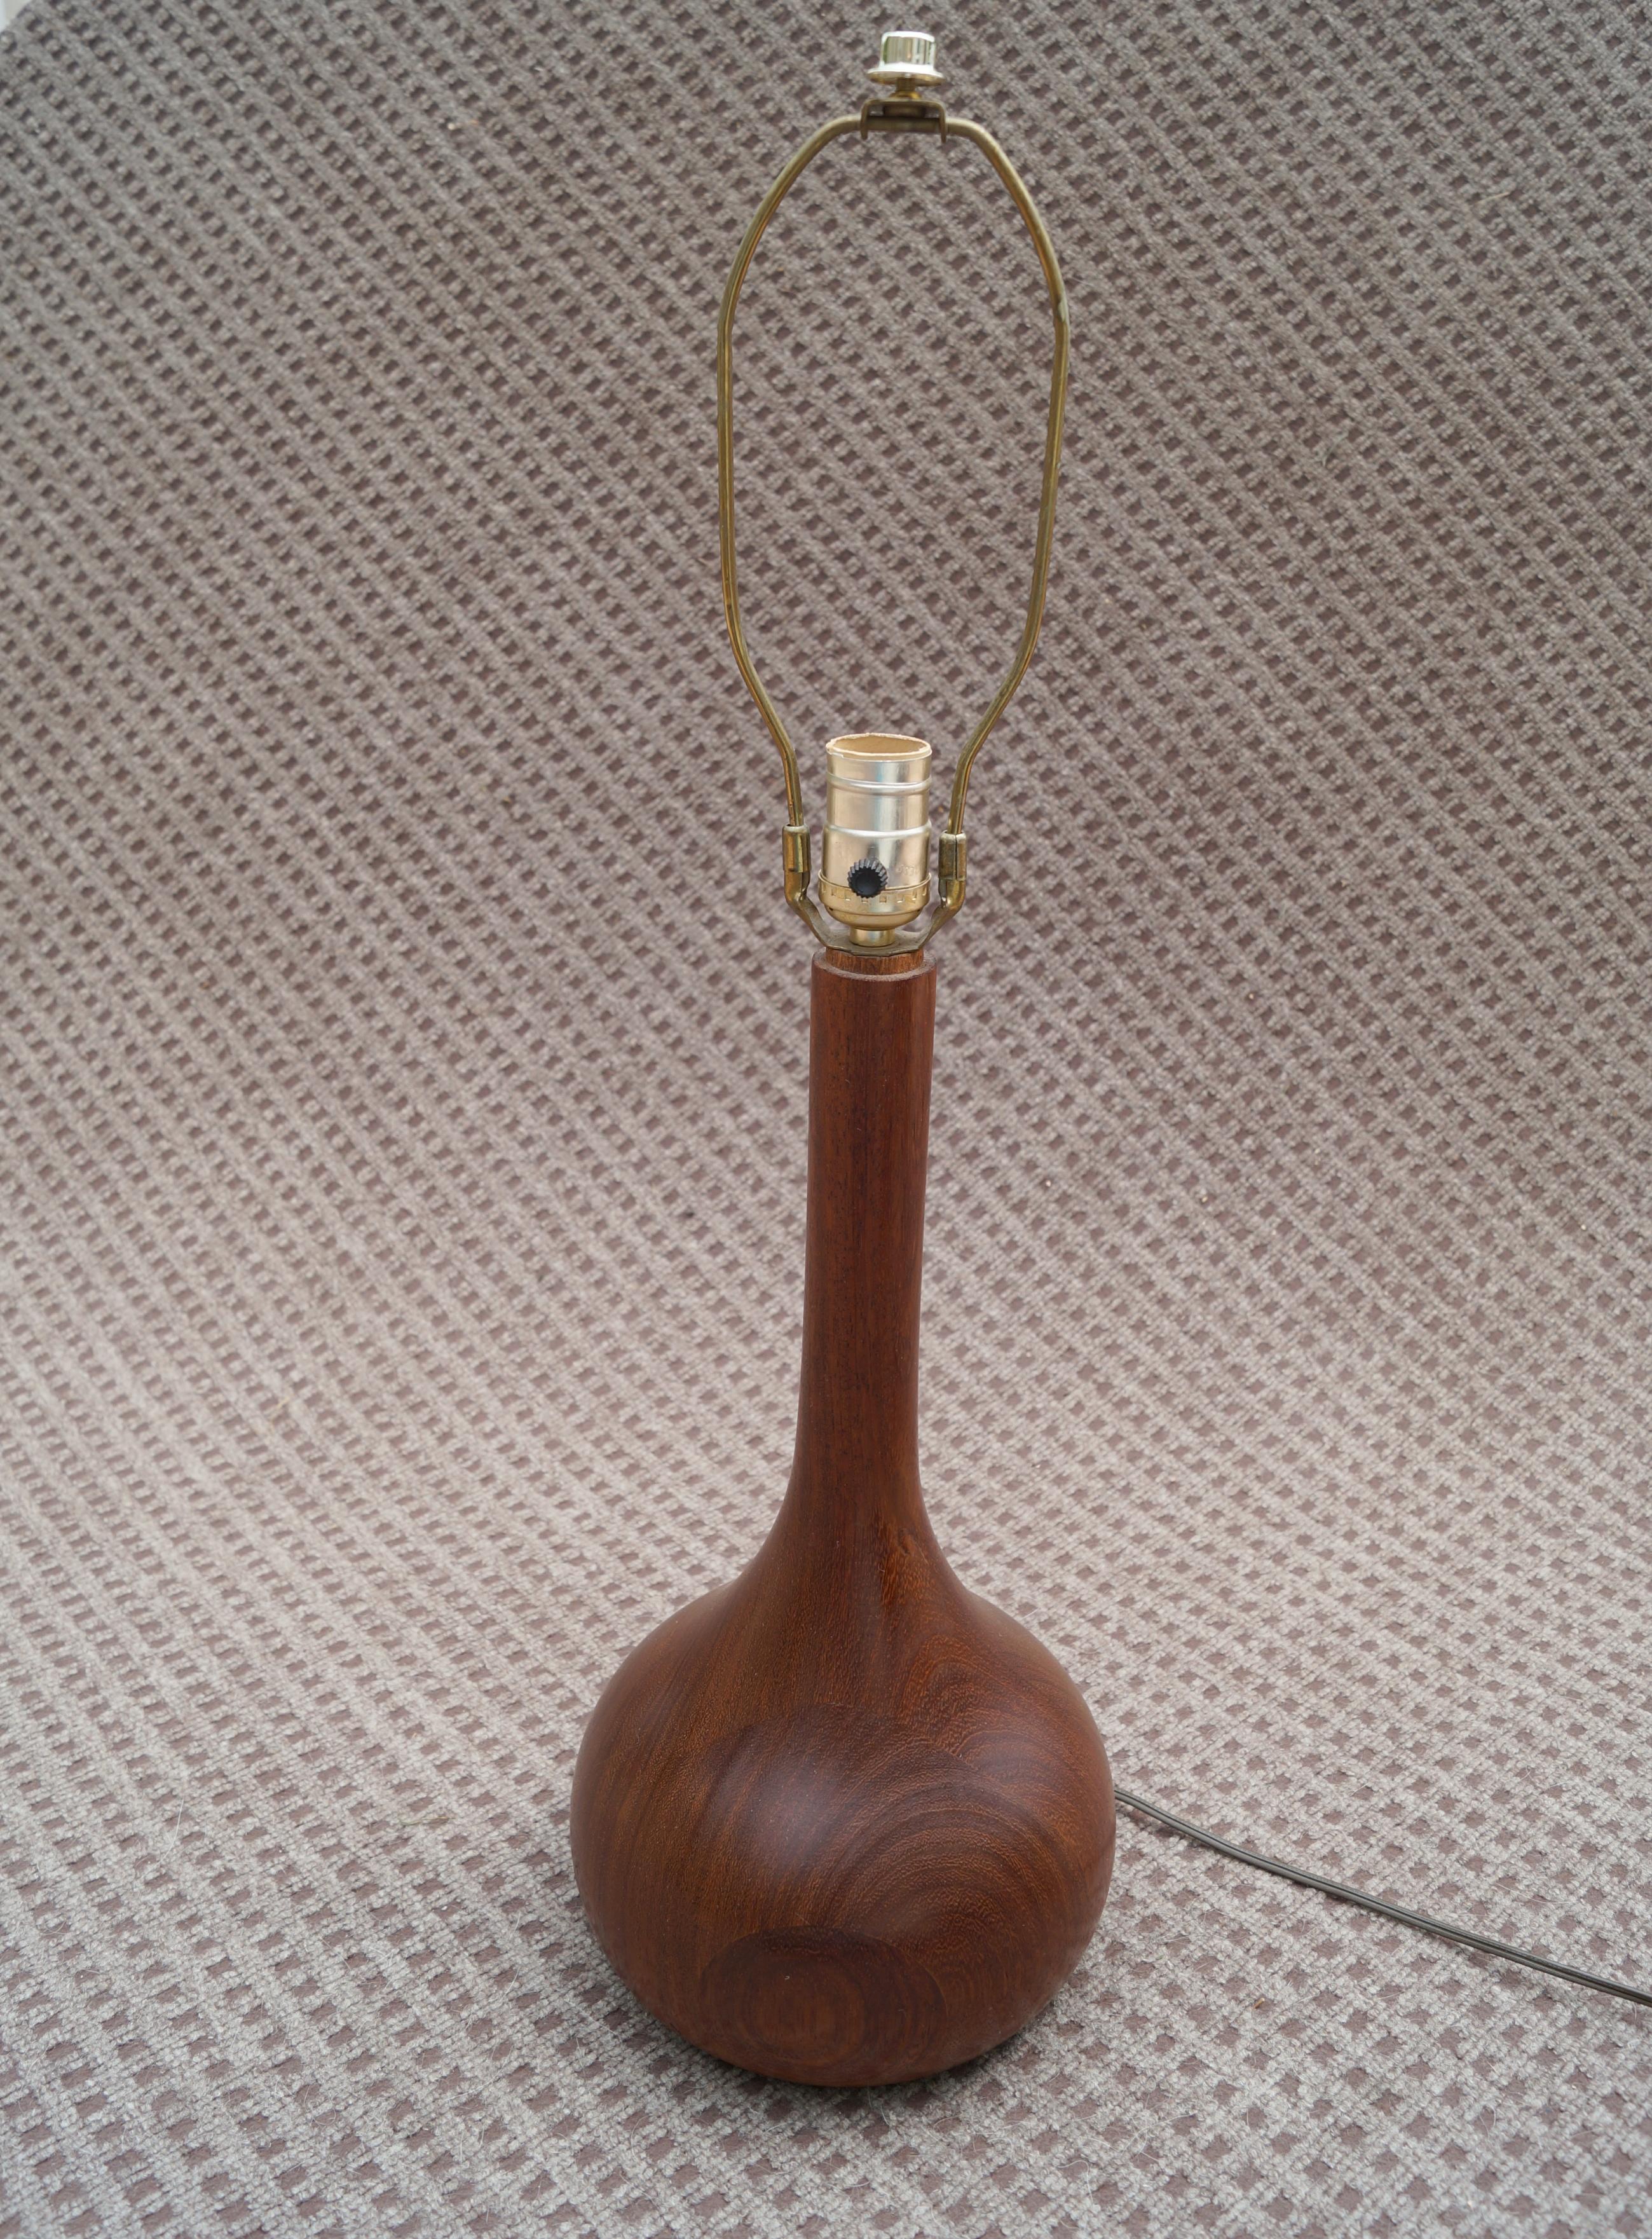 Danish Mid-Century Modern 3 way Teak Table Lamp. The photos are showing white glare marks. It is 18 7/8